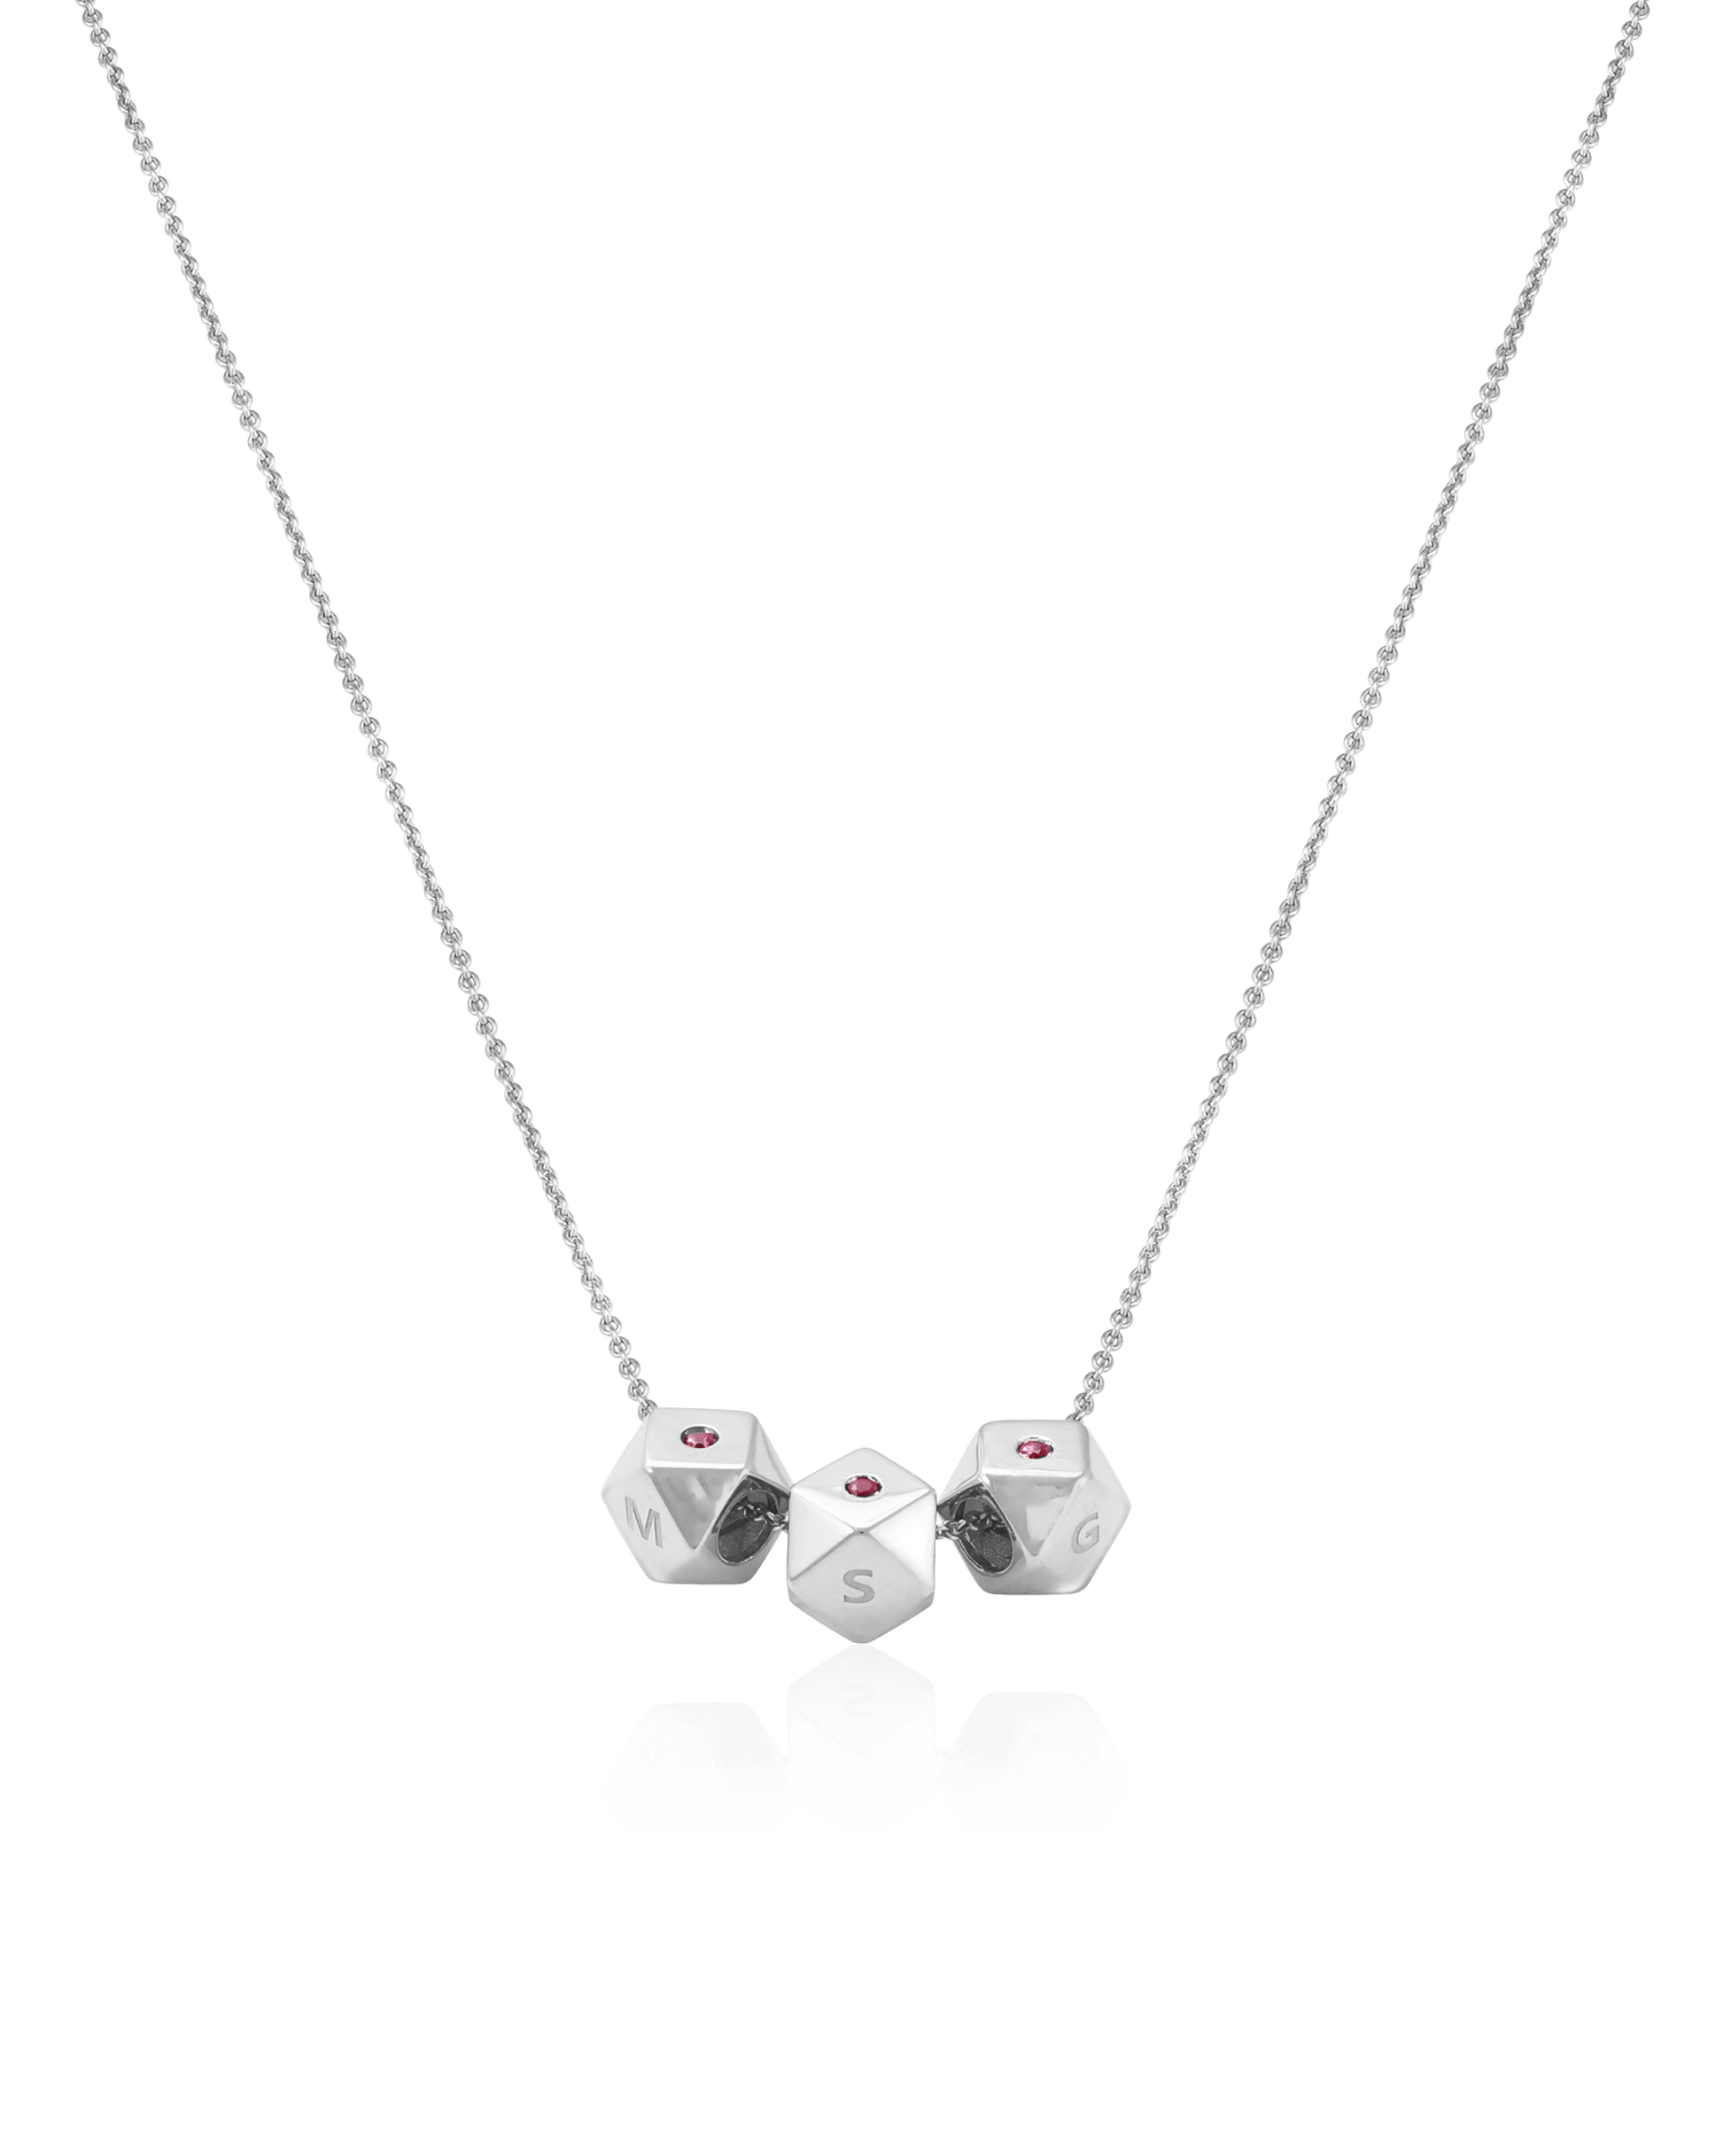 Hedra Necklace - 925 Sterling Silver Necklaces magal-dev 